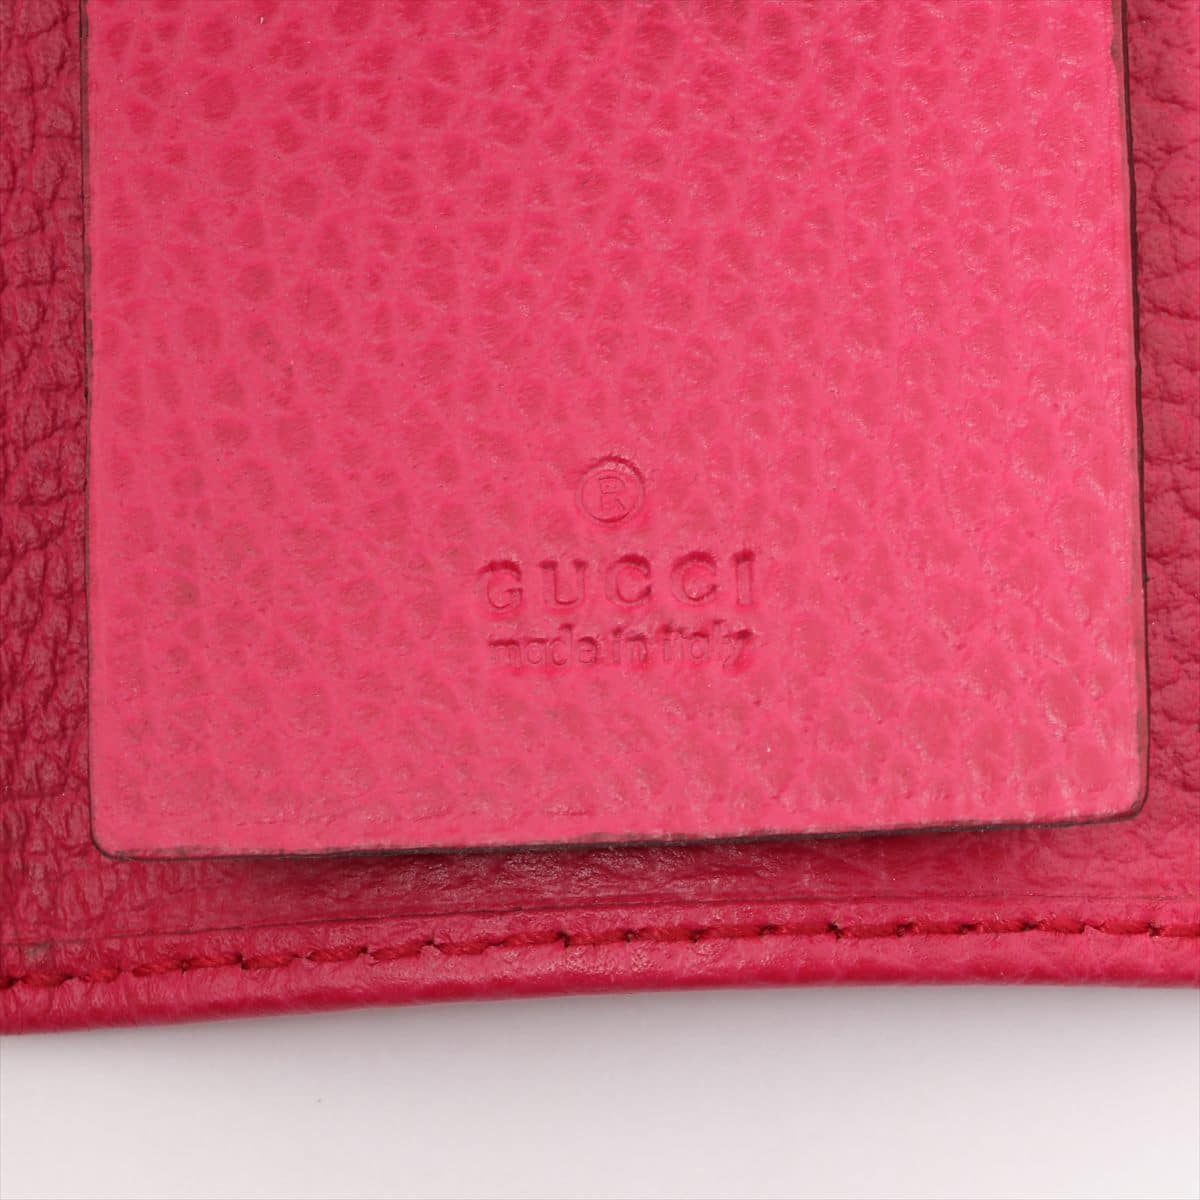 Gucci Swing 354499 Leather Key case Pink